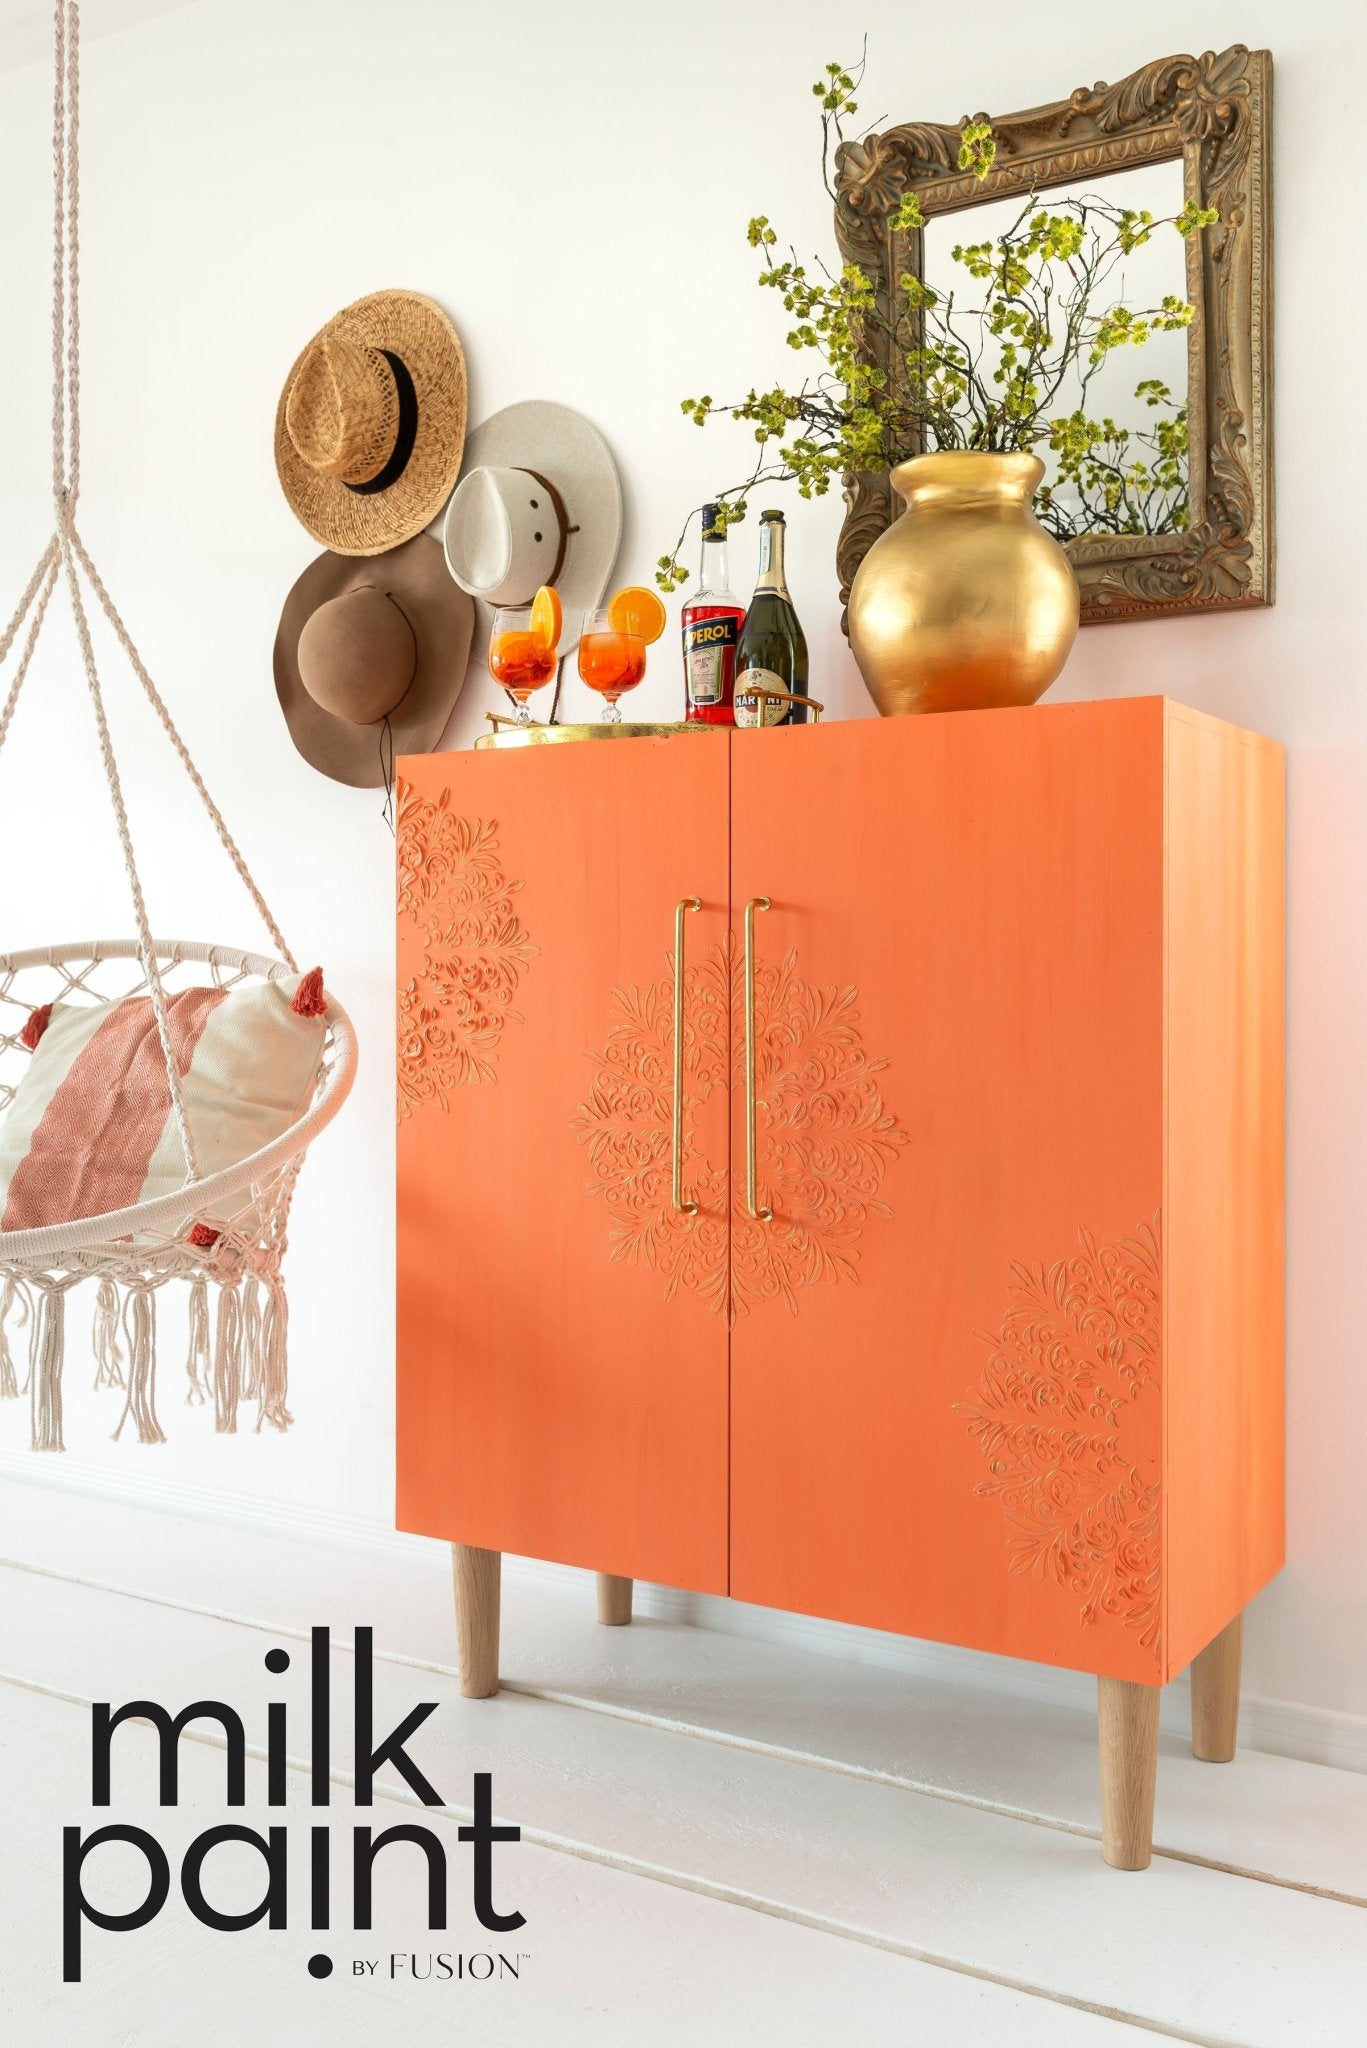 Milk Paint by Fusion - Aperol Spritz - Rustic River Home